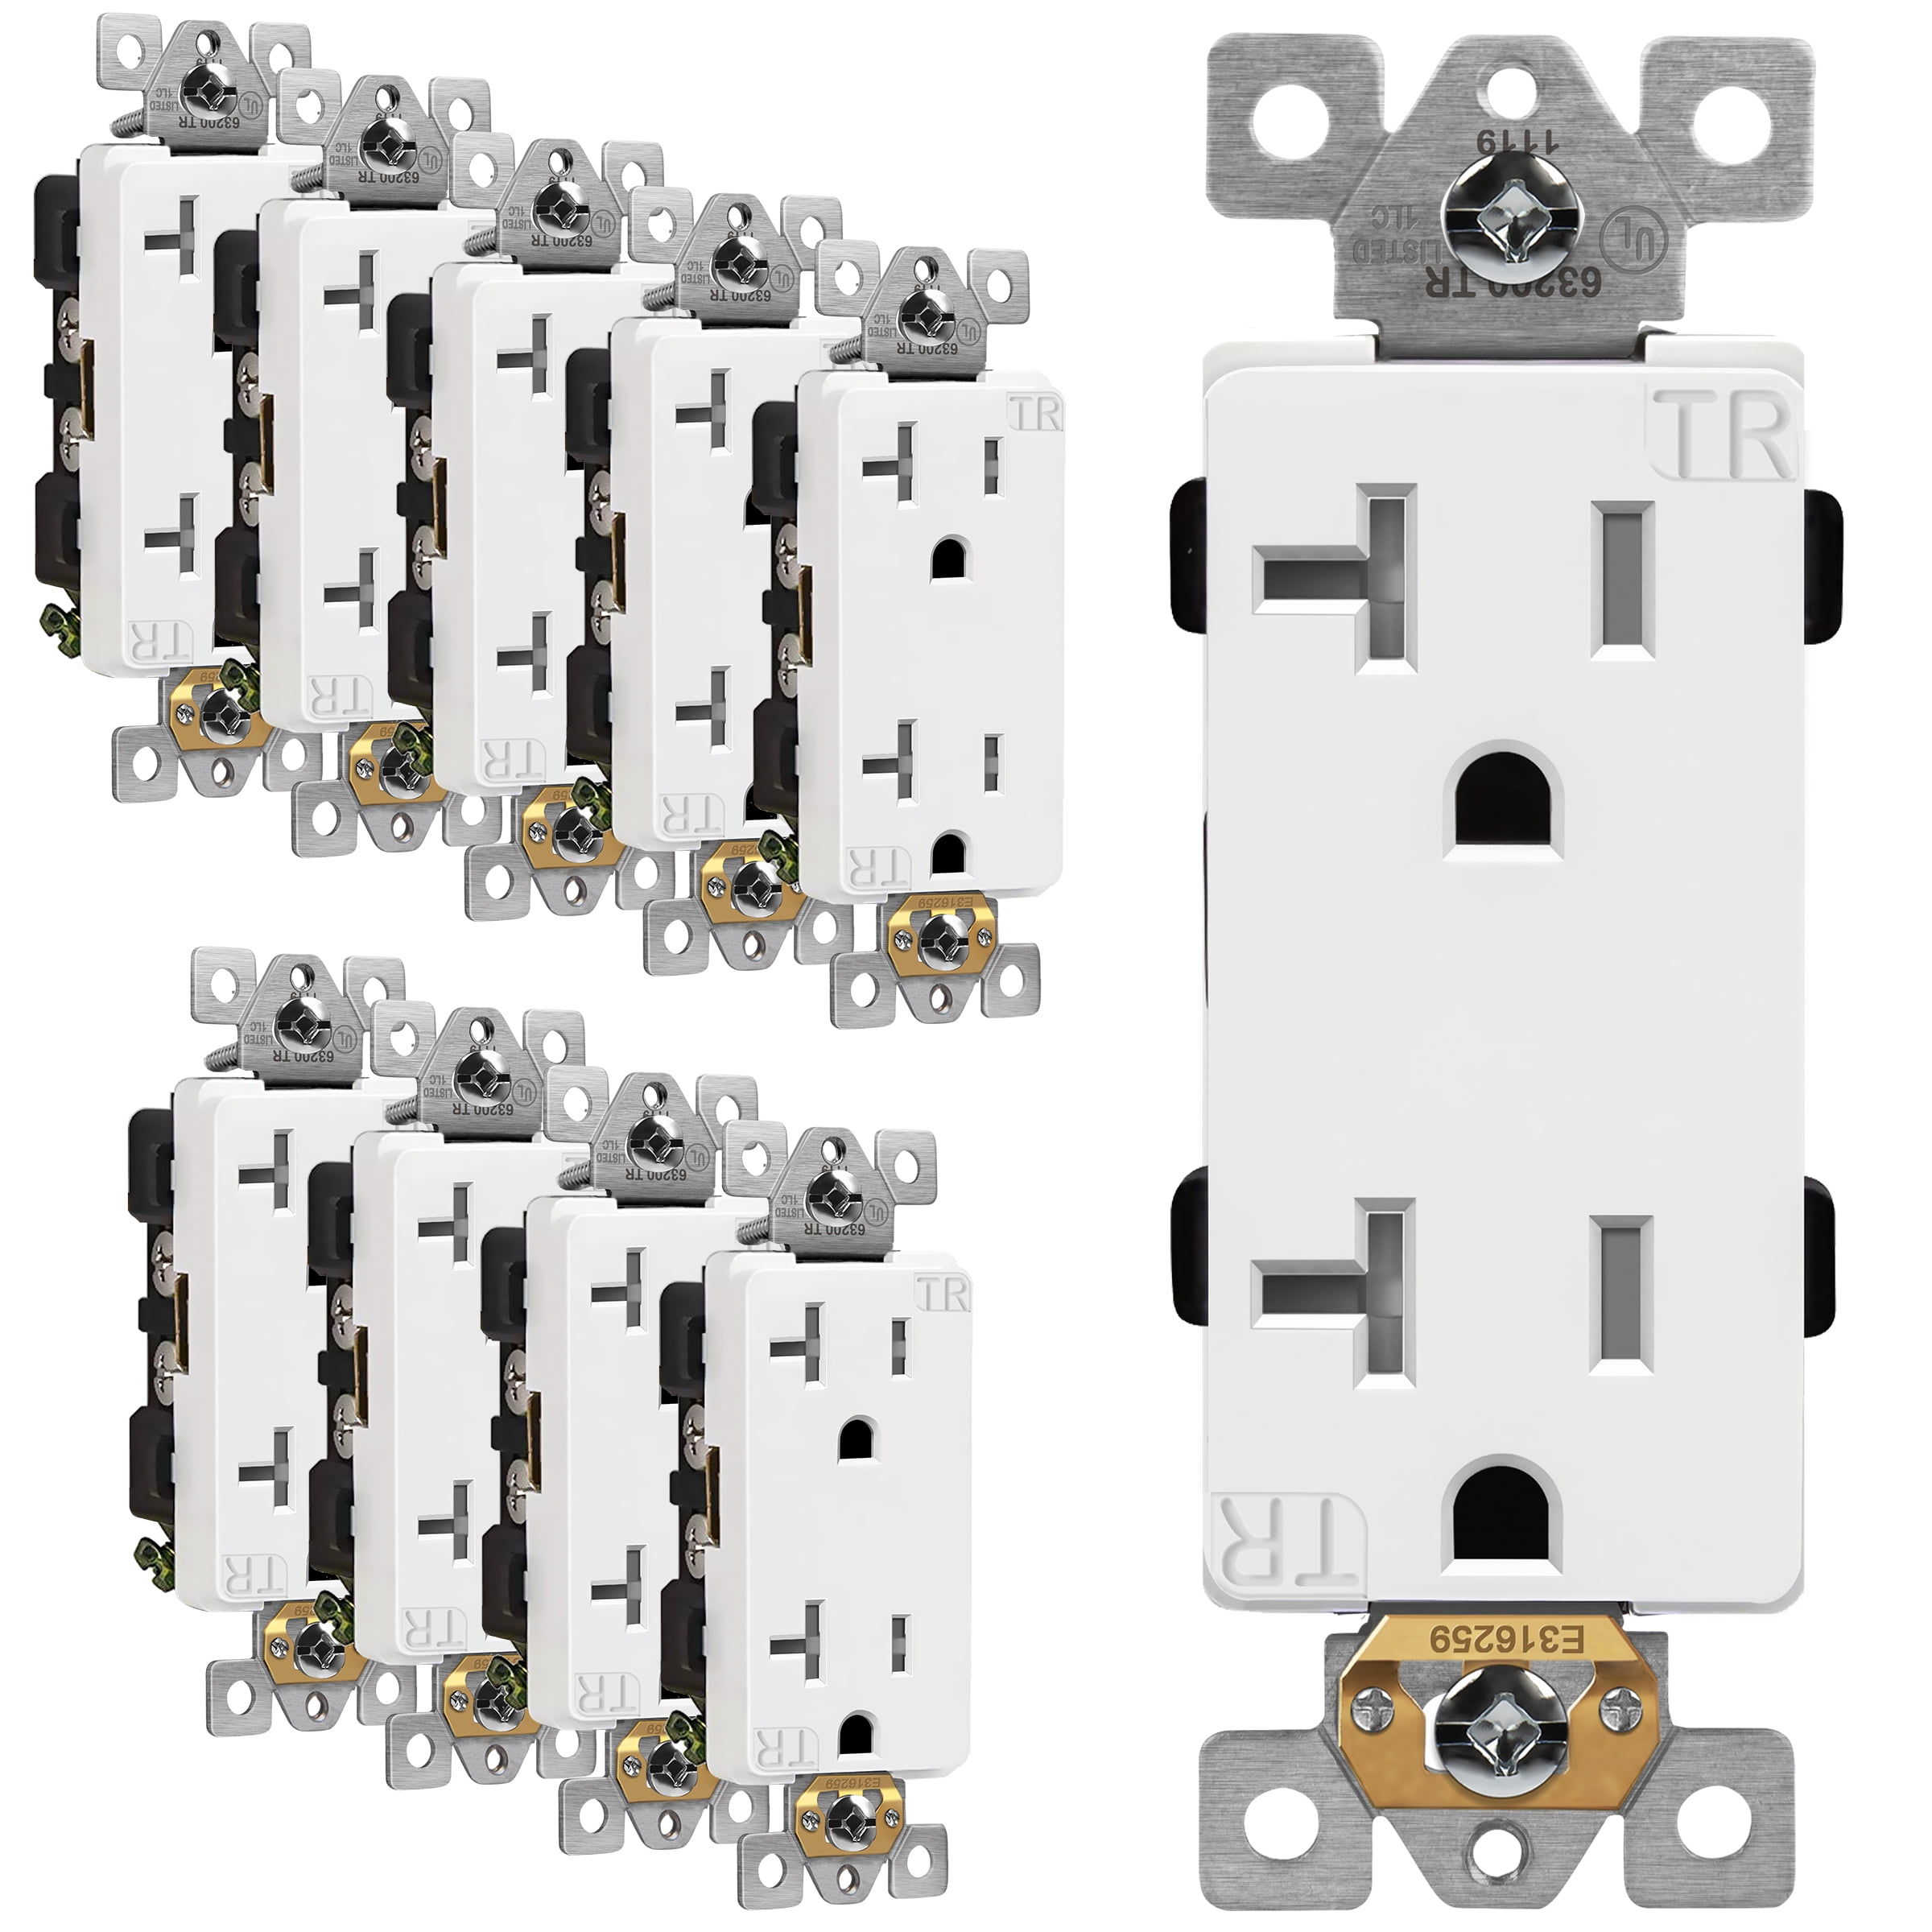 ENERLITES Heavy Duty 20A 125V Duplex Outlet Receptacle 5-20R 10 Pack 